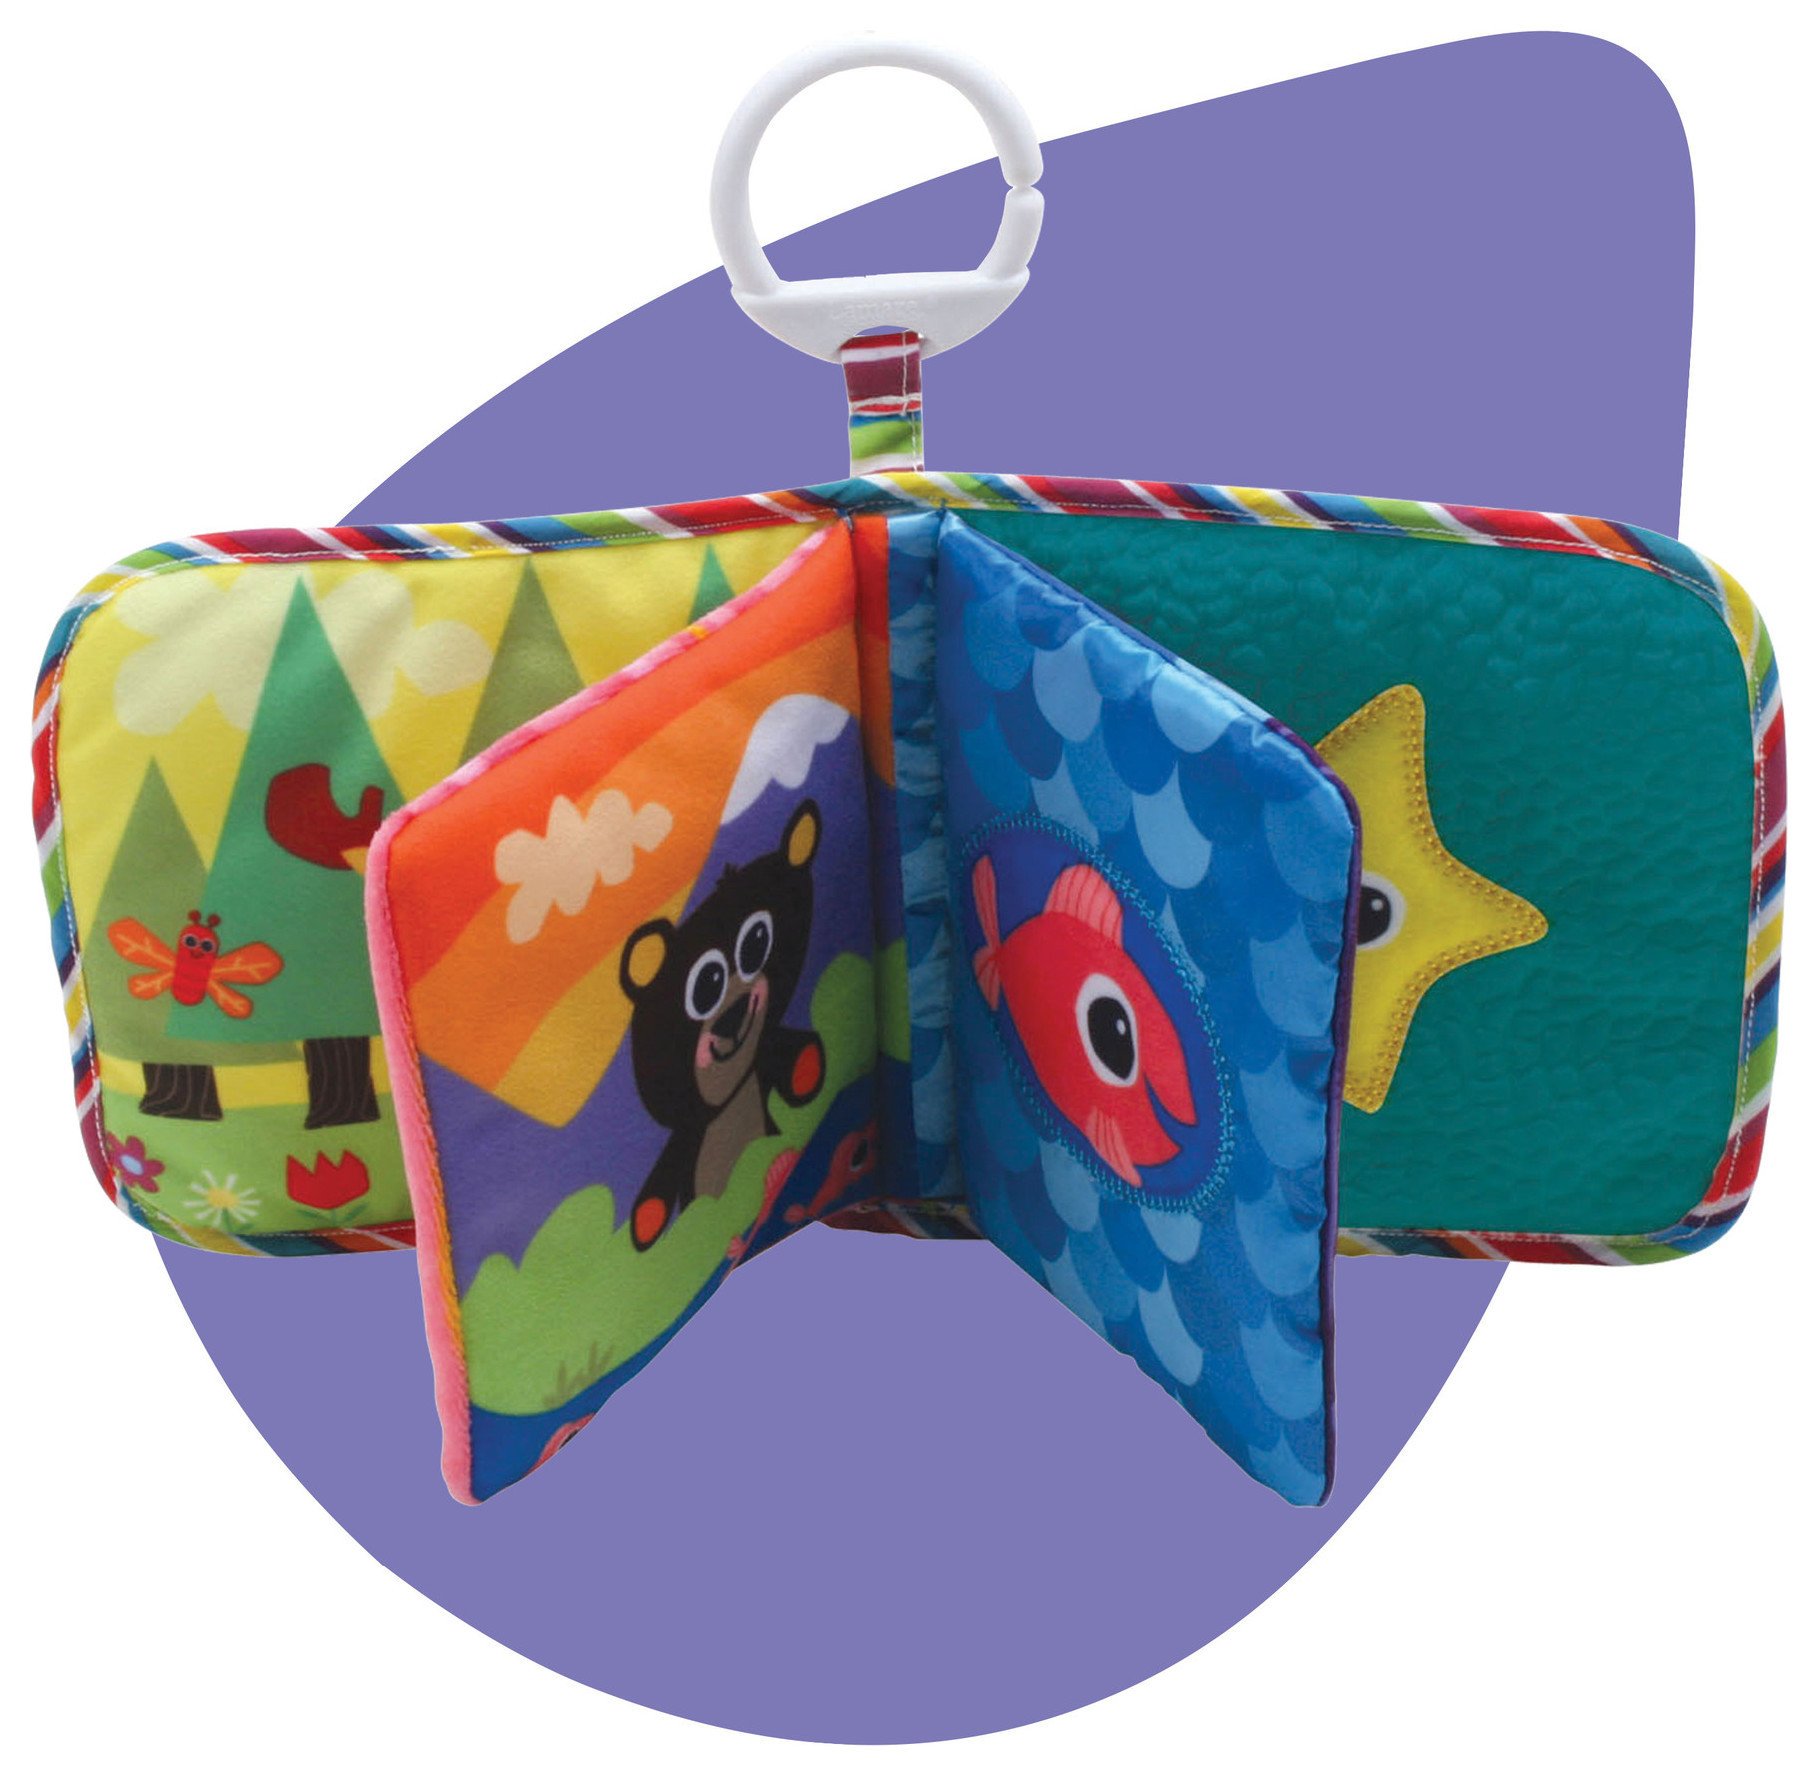 Tomy Lamaze Classic Discovery Book. Review